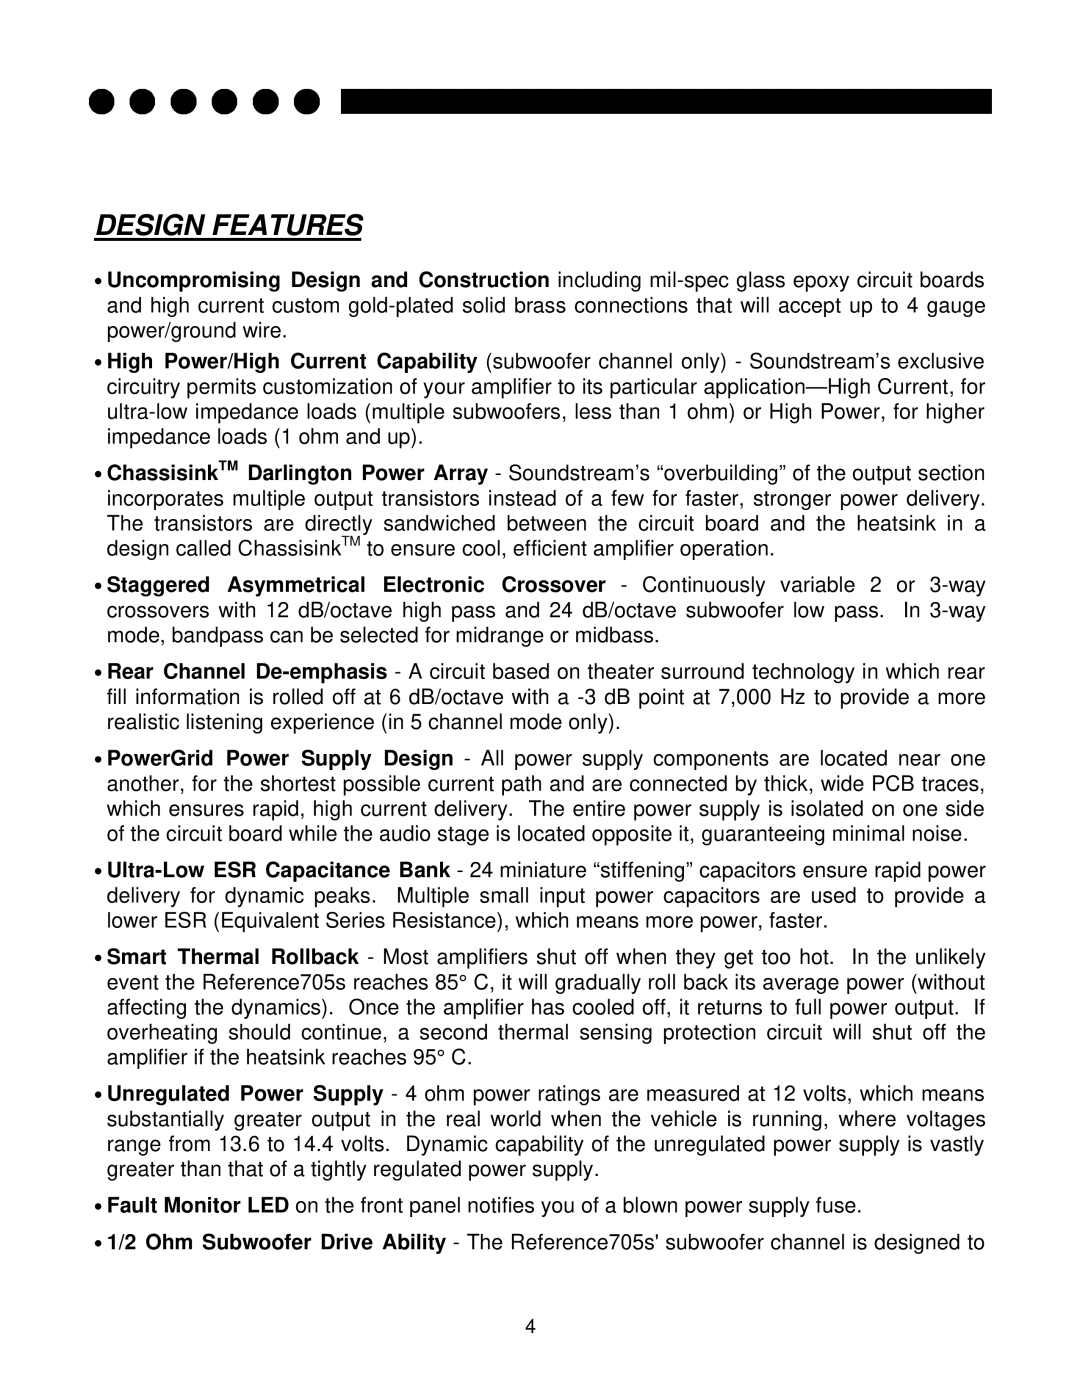 Soundstream Technologies 705s owner manual Design Features 